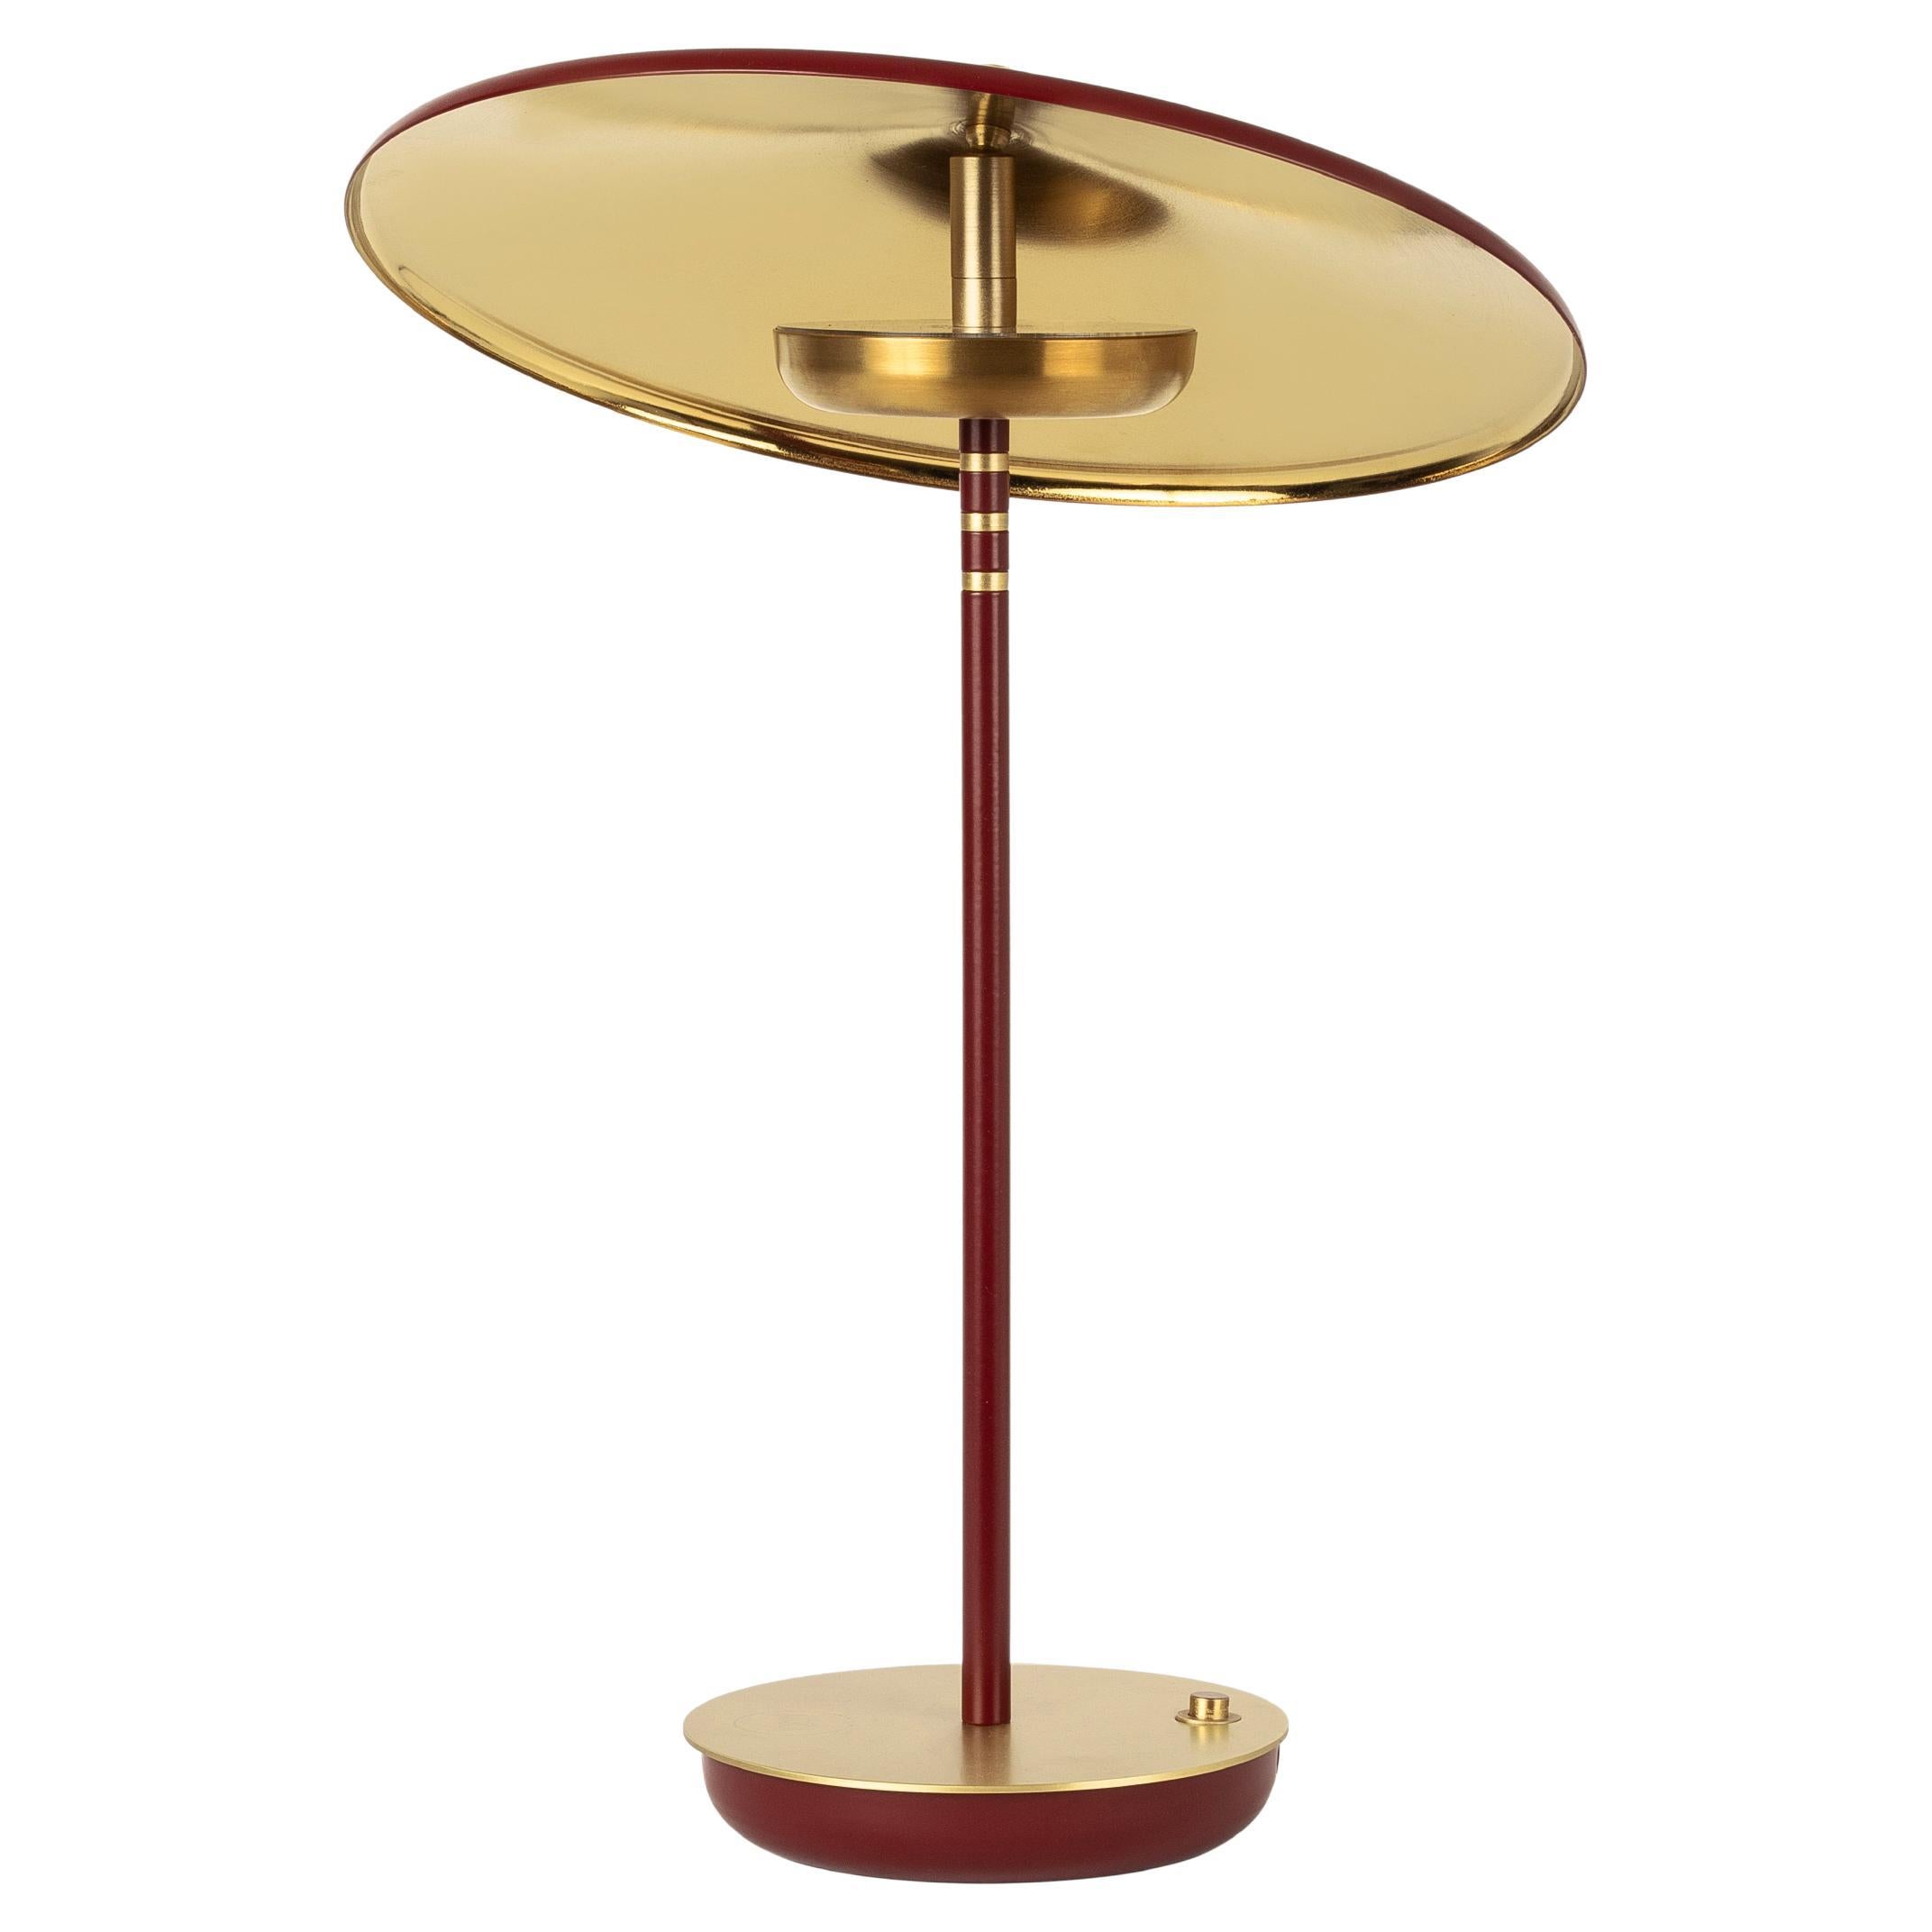 Materials: Brass (Satine Finish), Iron (With Electrostatic Paint)
Plug Type: EU Plug (US Adaptor Avaliable)
Voltage: 110-240V
Bulb: 3 WATT integrated LED
Light Color: 2700K

The serie is inspired by hanging French berets on 1920s hat store displays